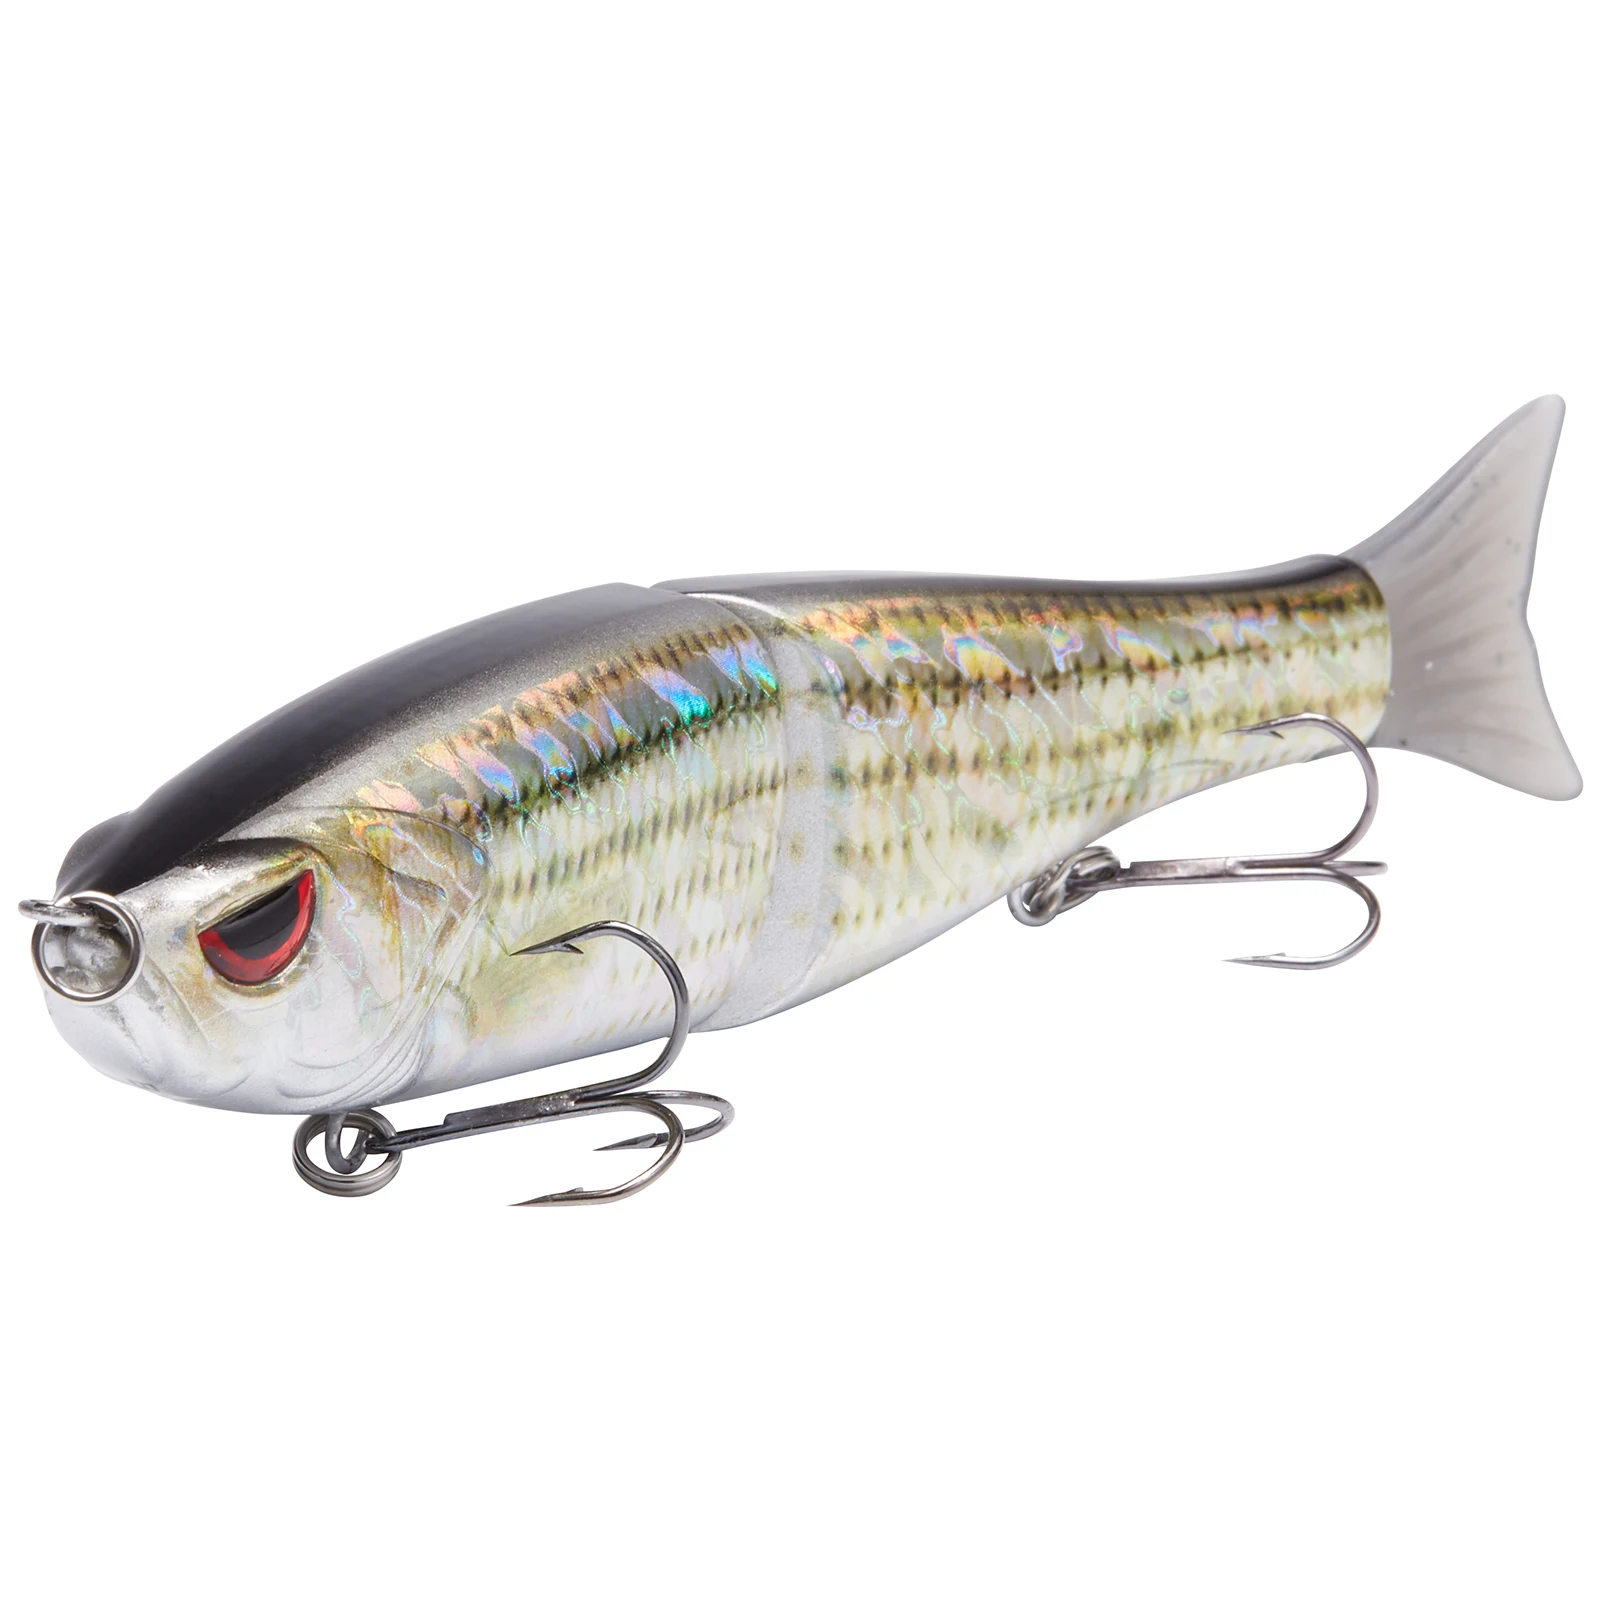 Bassdash Glide Baits for Pike Salmon Trout Topwater Single-Jointed Swimbait  Bass Fishing Lure 11.43cm/18.5g 17.78cm/62.5g